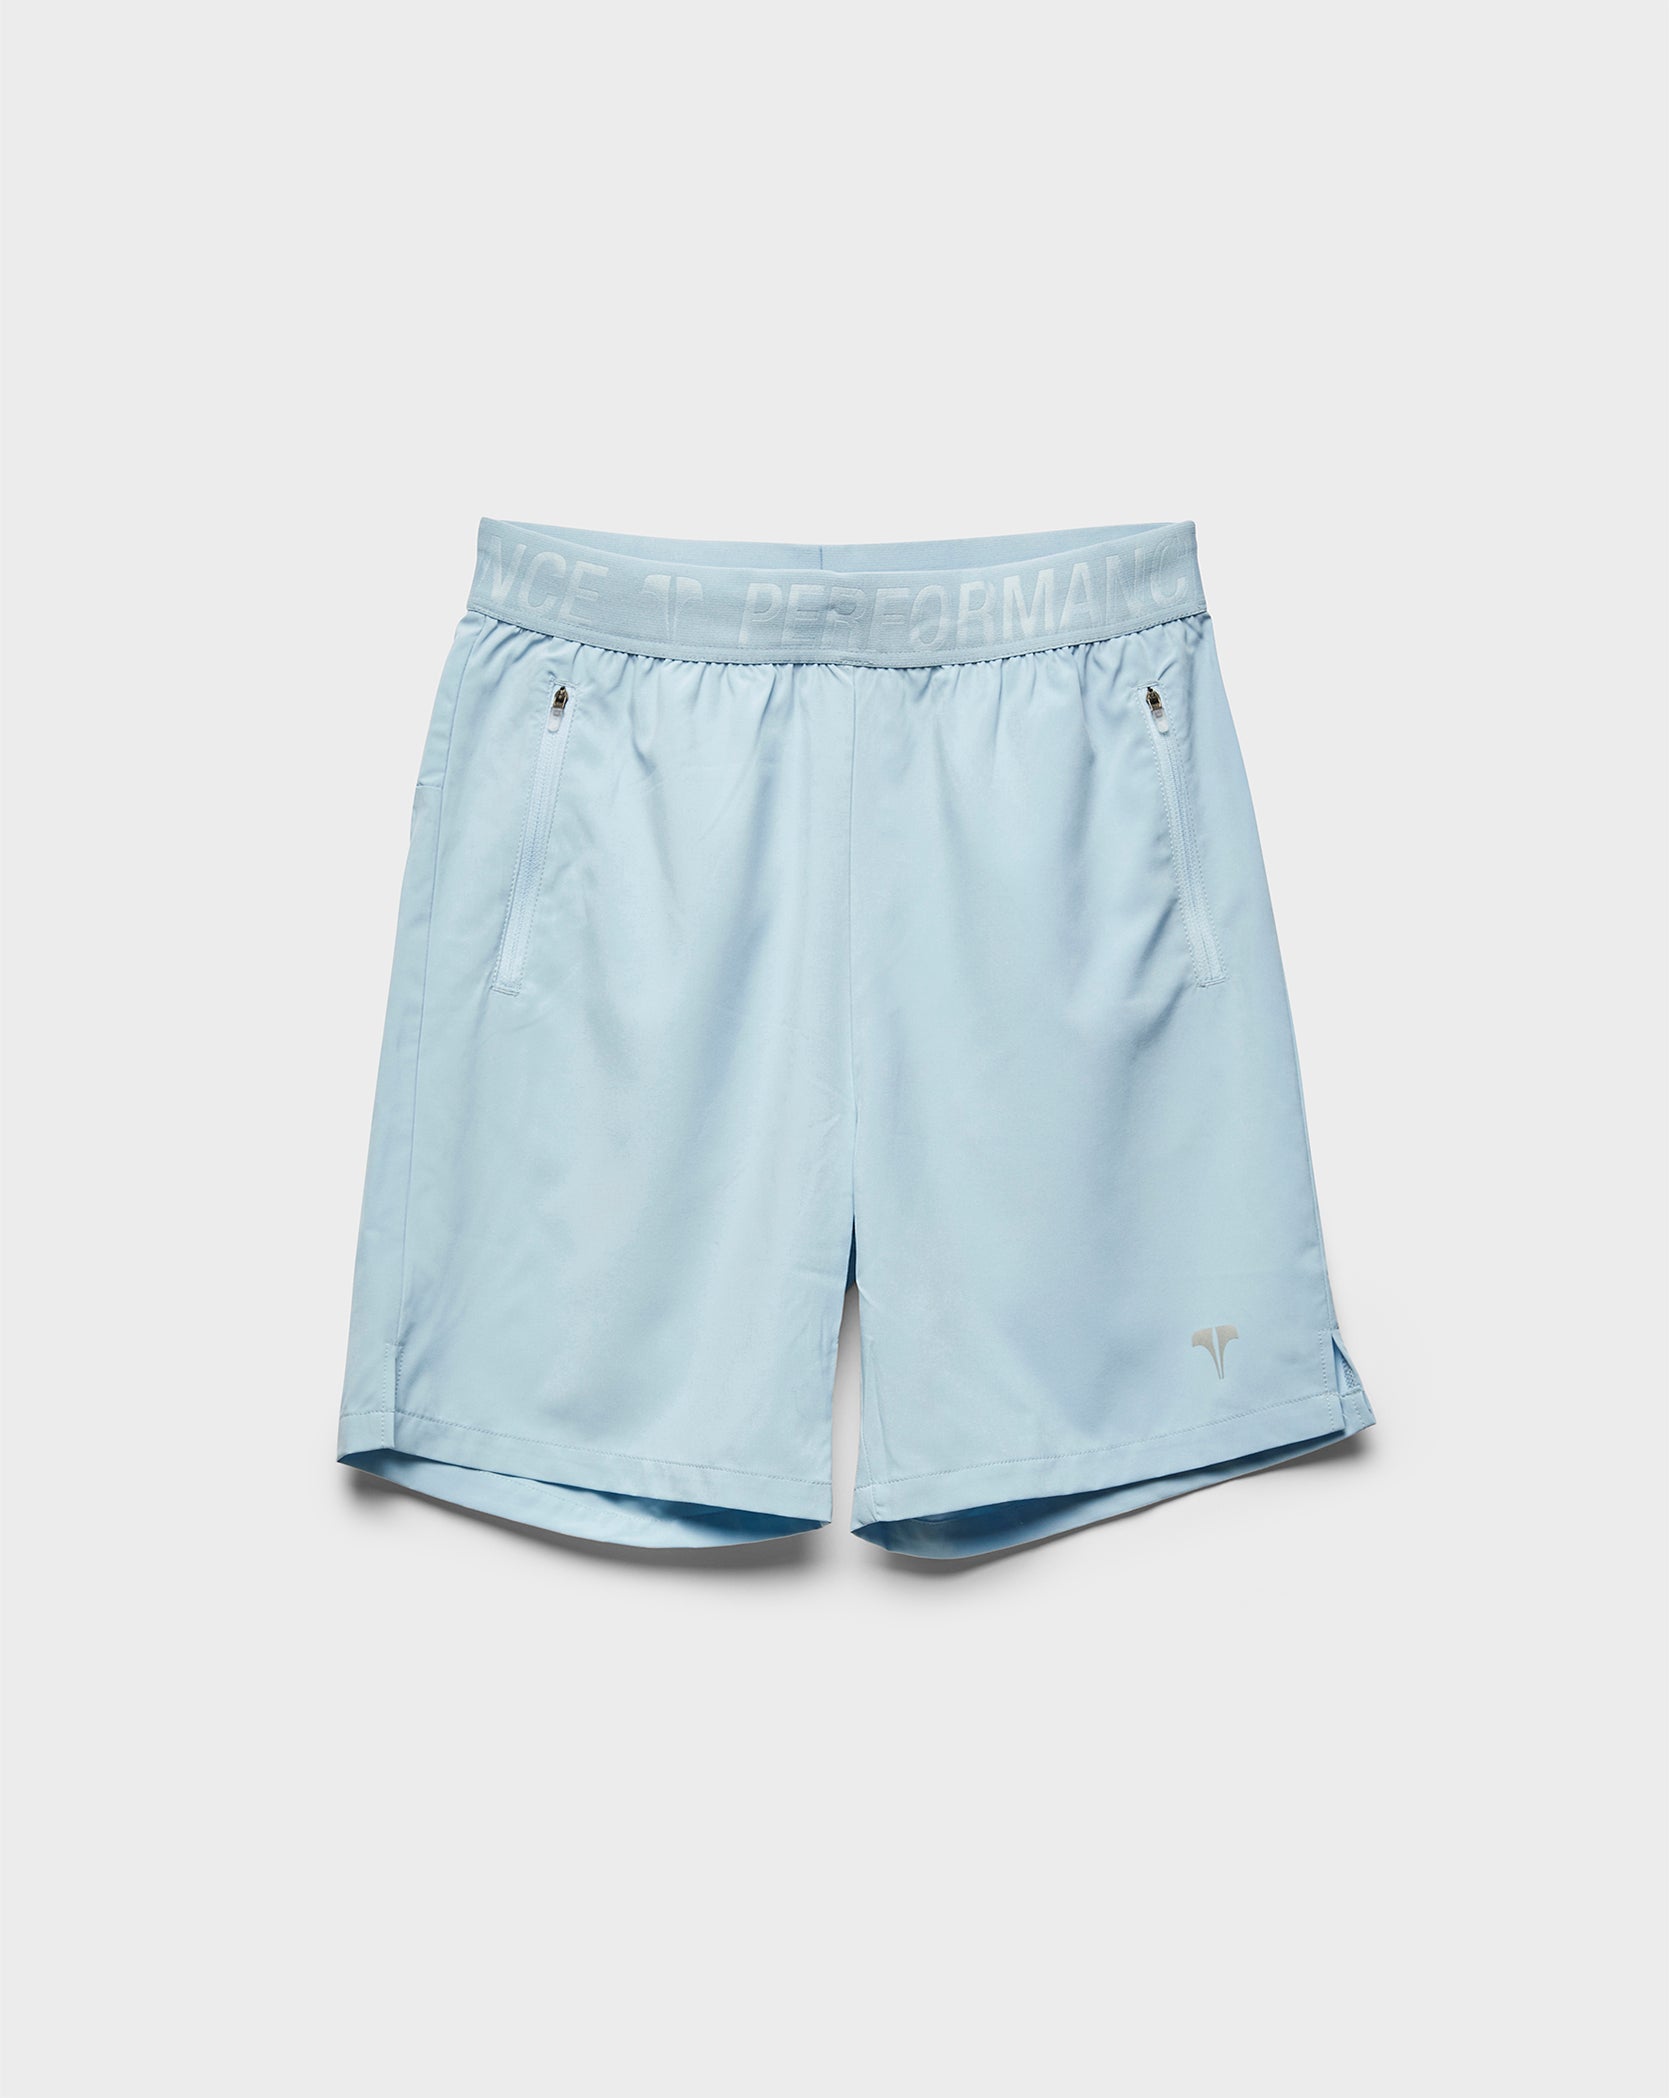 Twinzz active sky blue shorts front